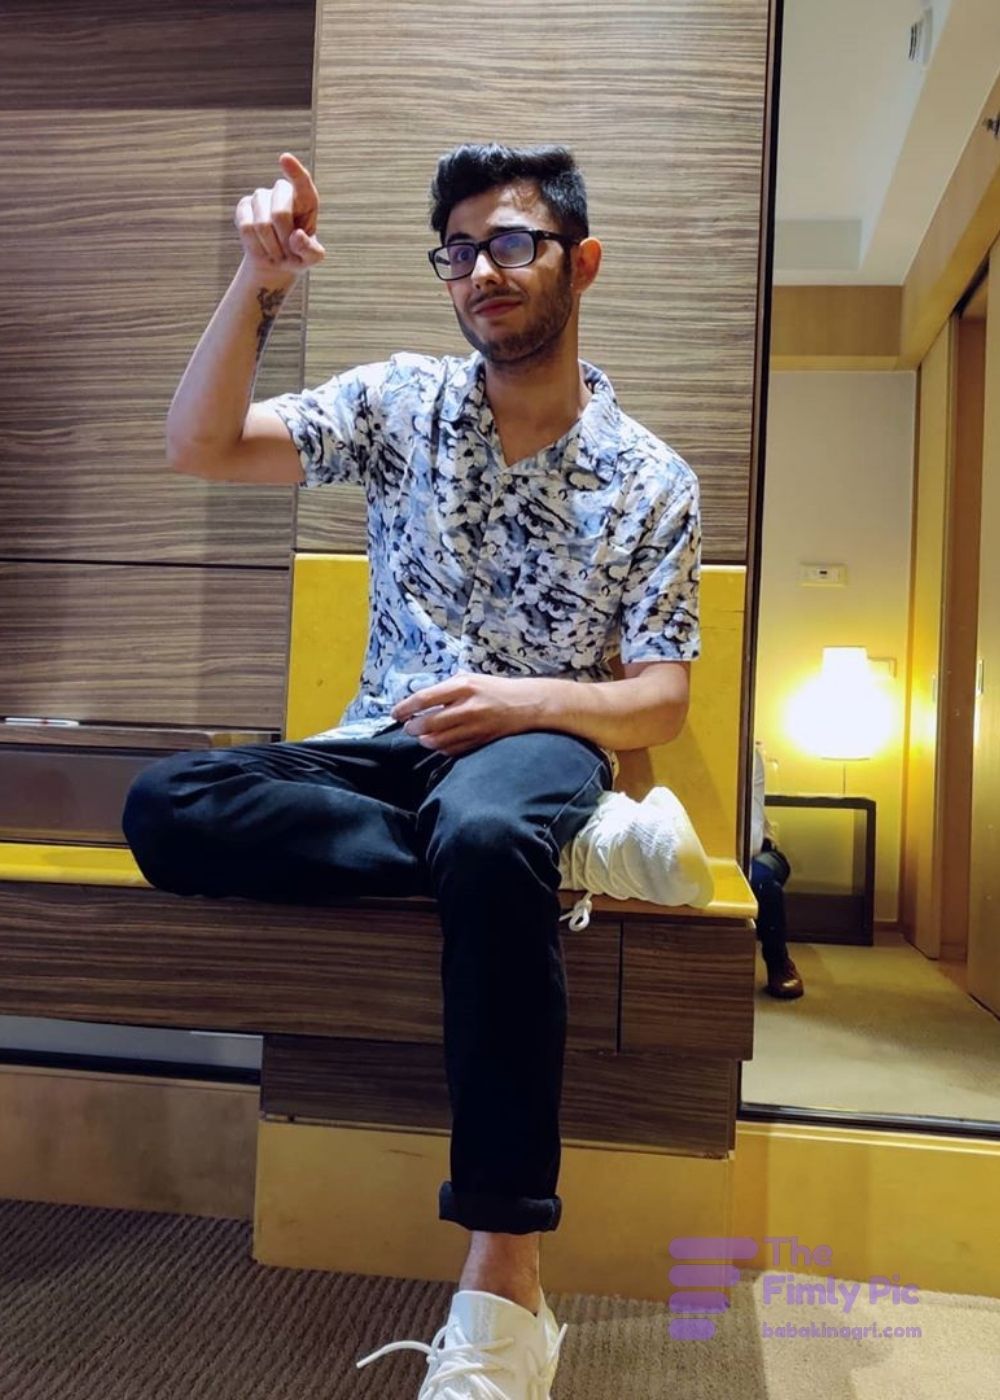 Latest Images of Carryminati